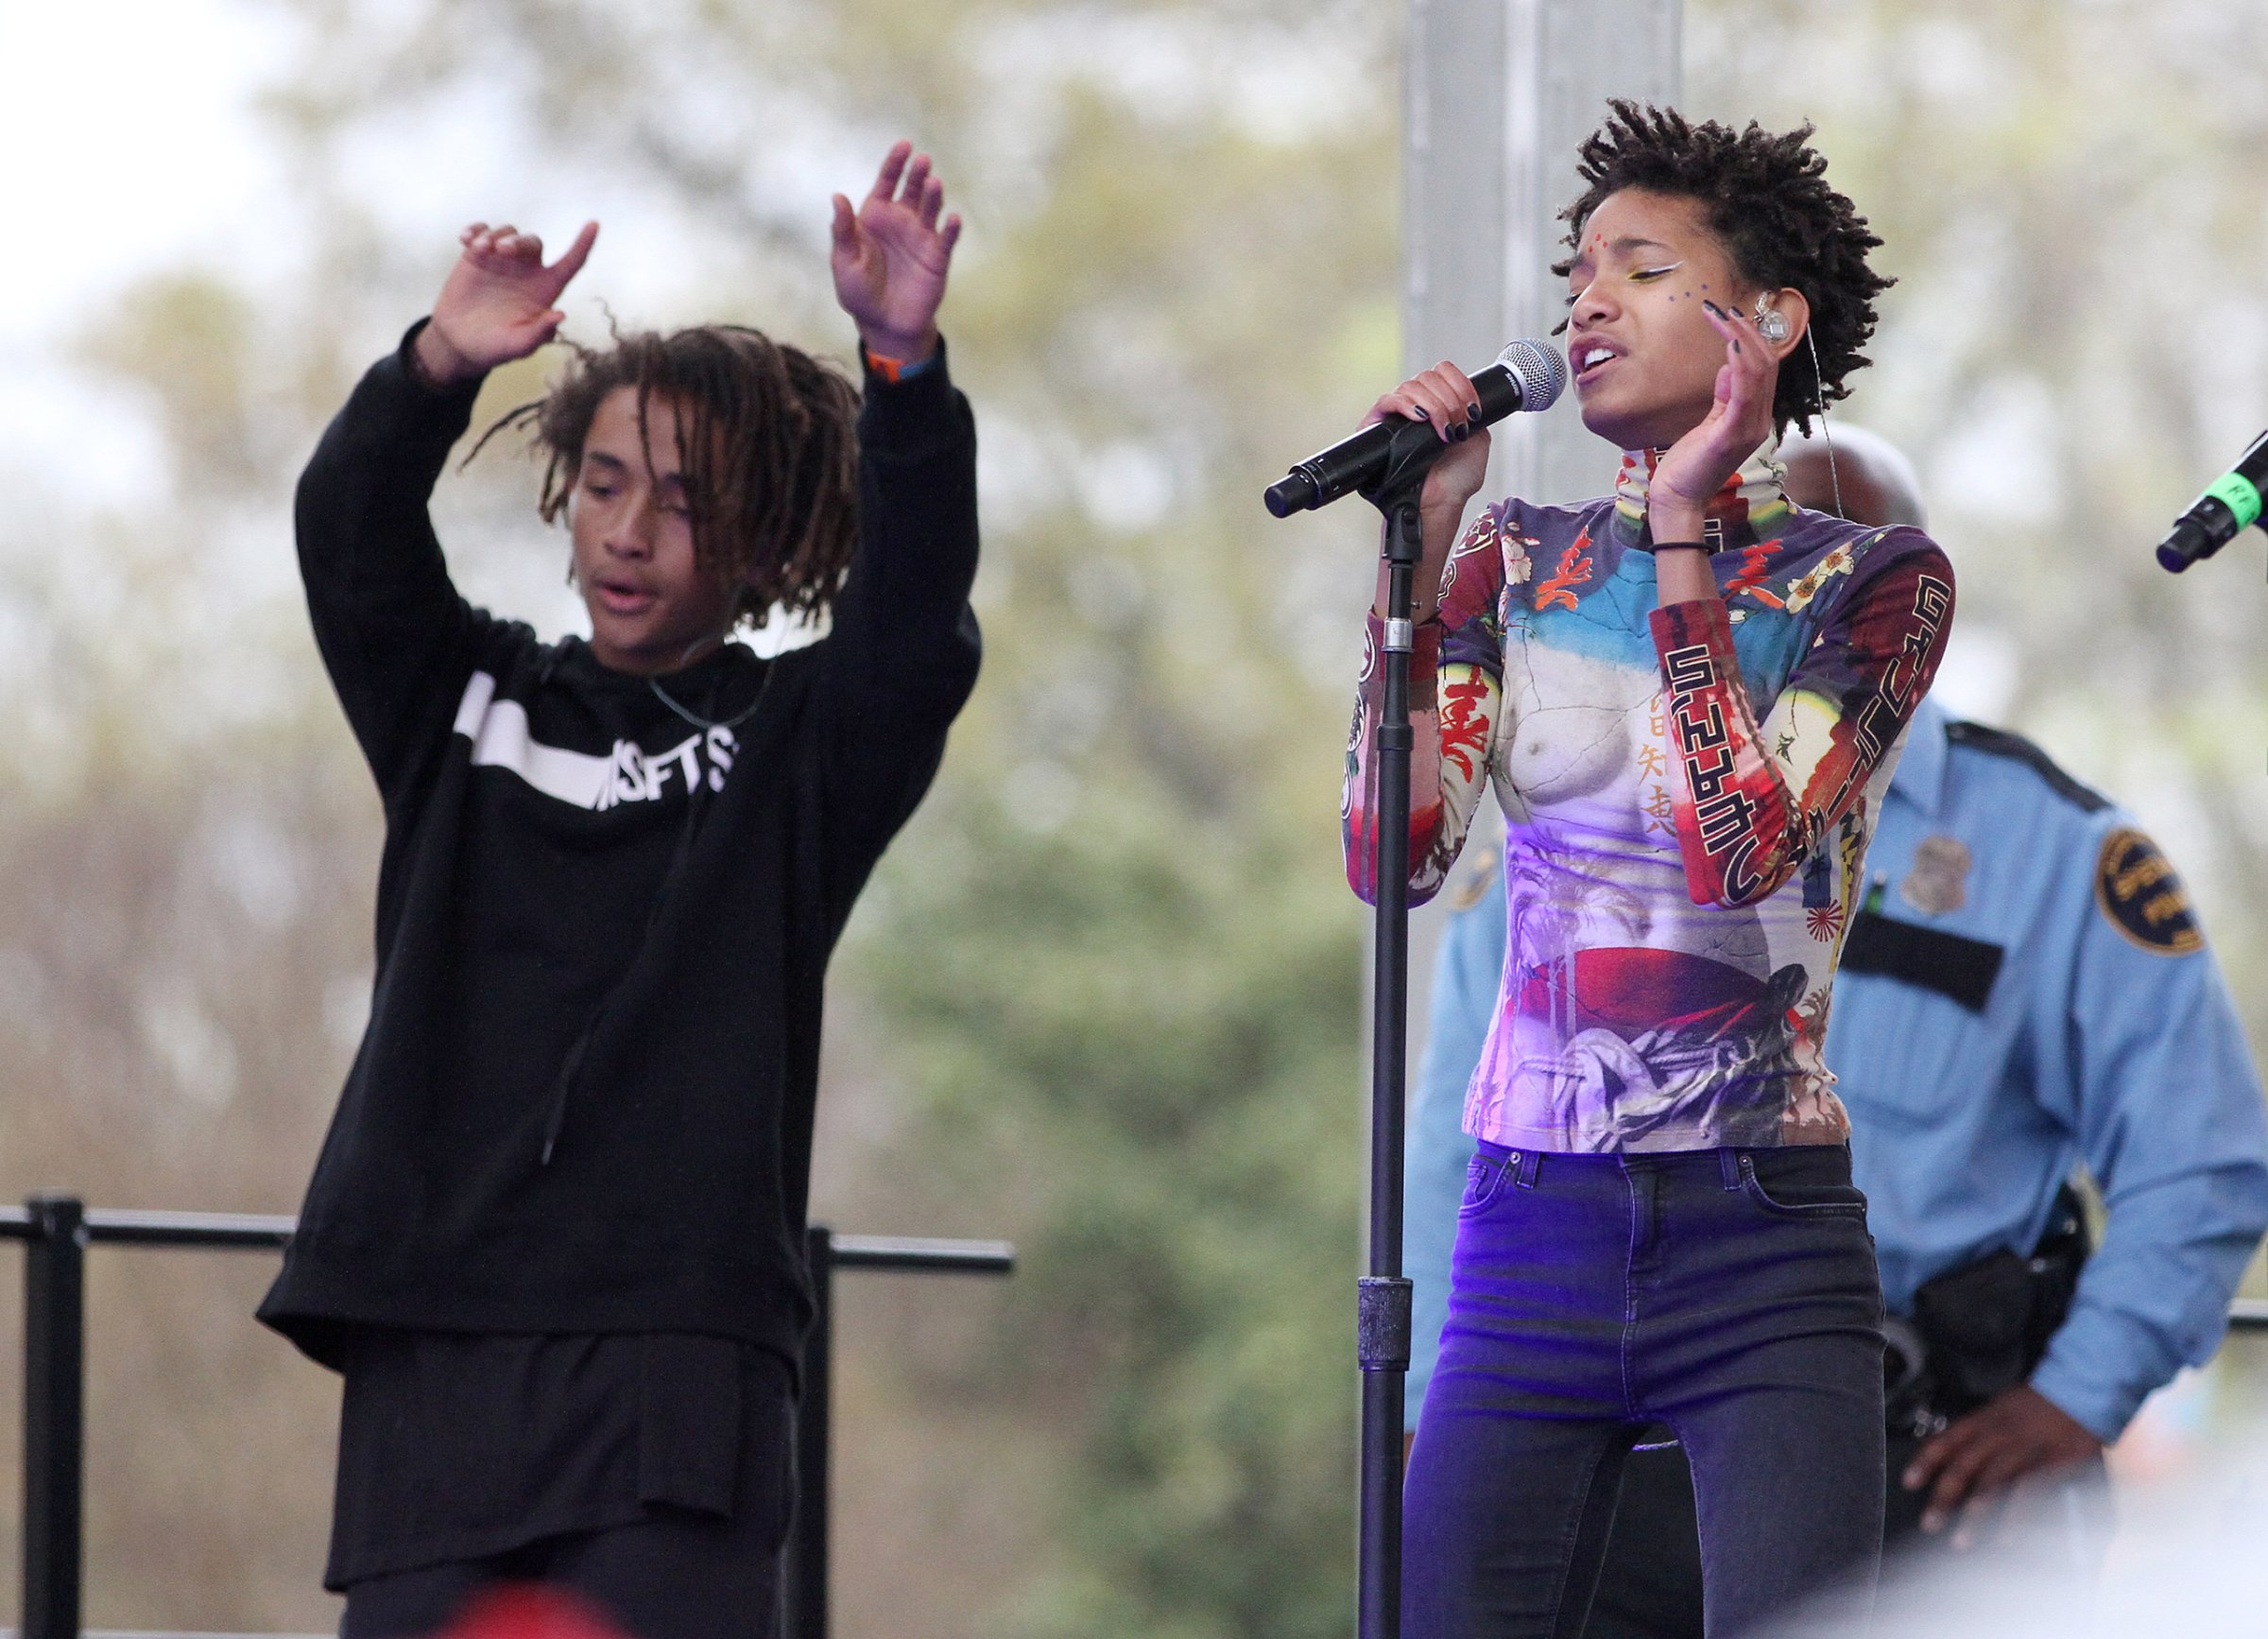 Willow and Jaden Smith right perform at the 2015 Broccoli City Festival at the Gateway DC Pavilion in Washington, D.C., April 25, 2015.